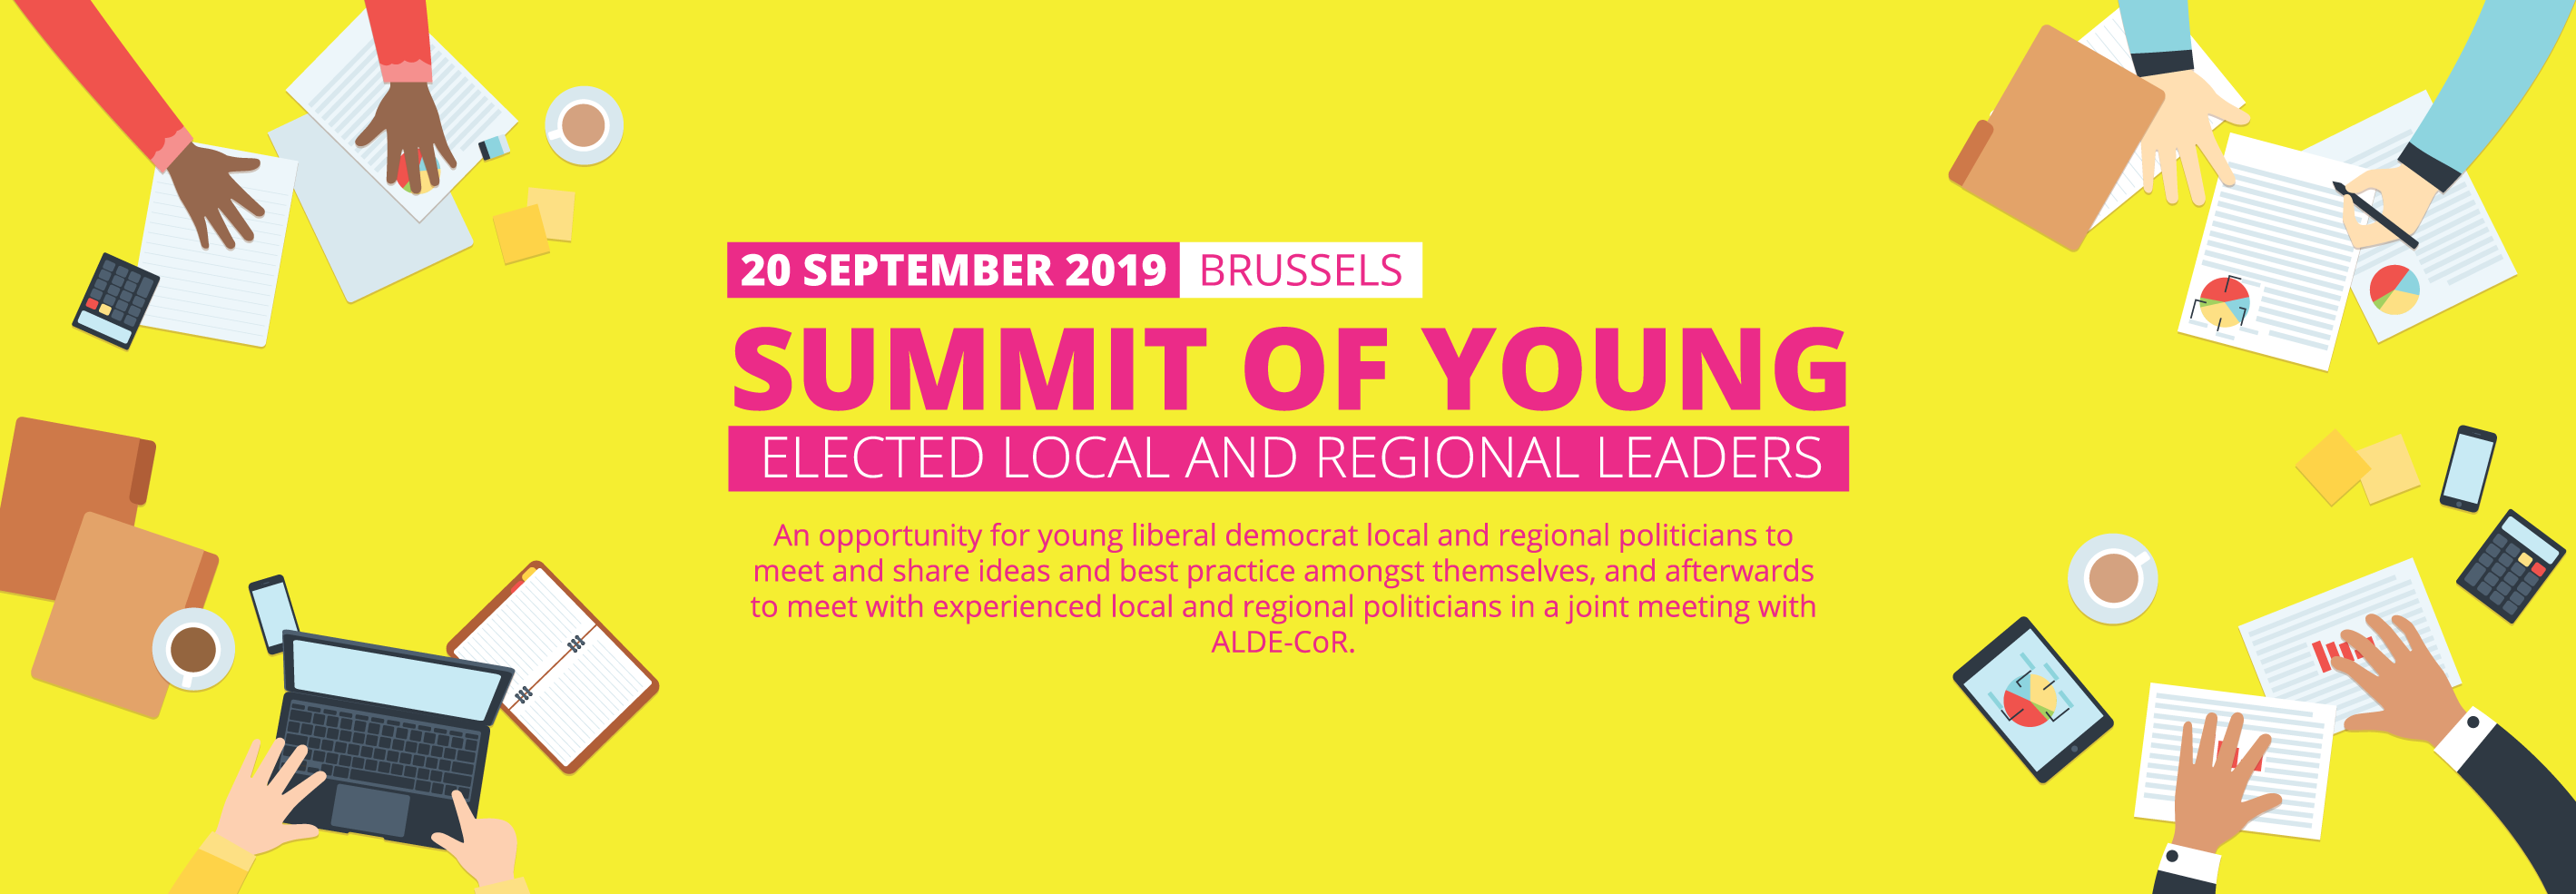 Launch of 3rd Summit of Young Elected Local and Regional Leaders